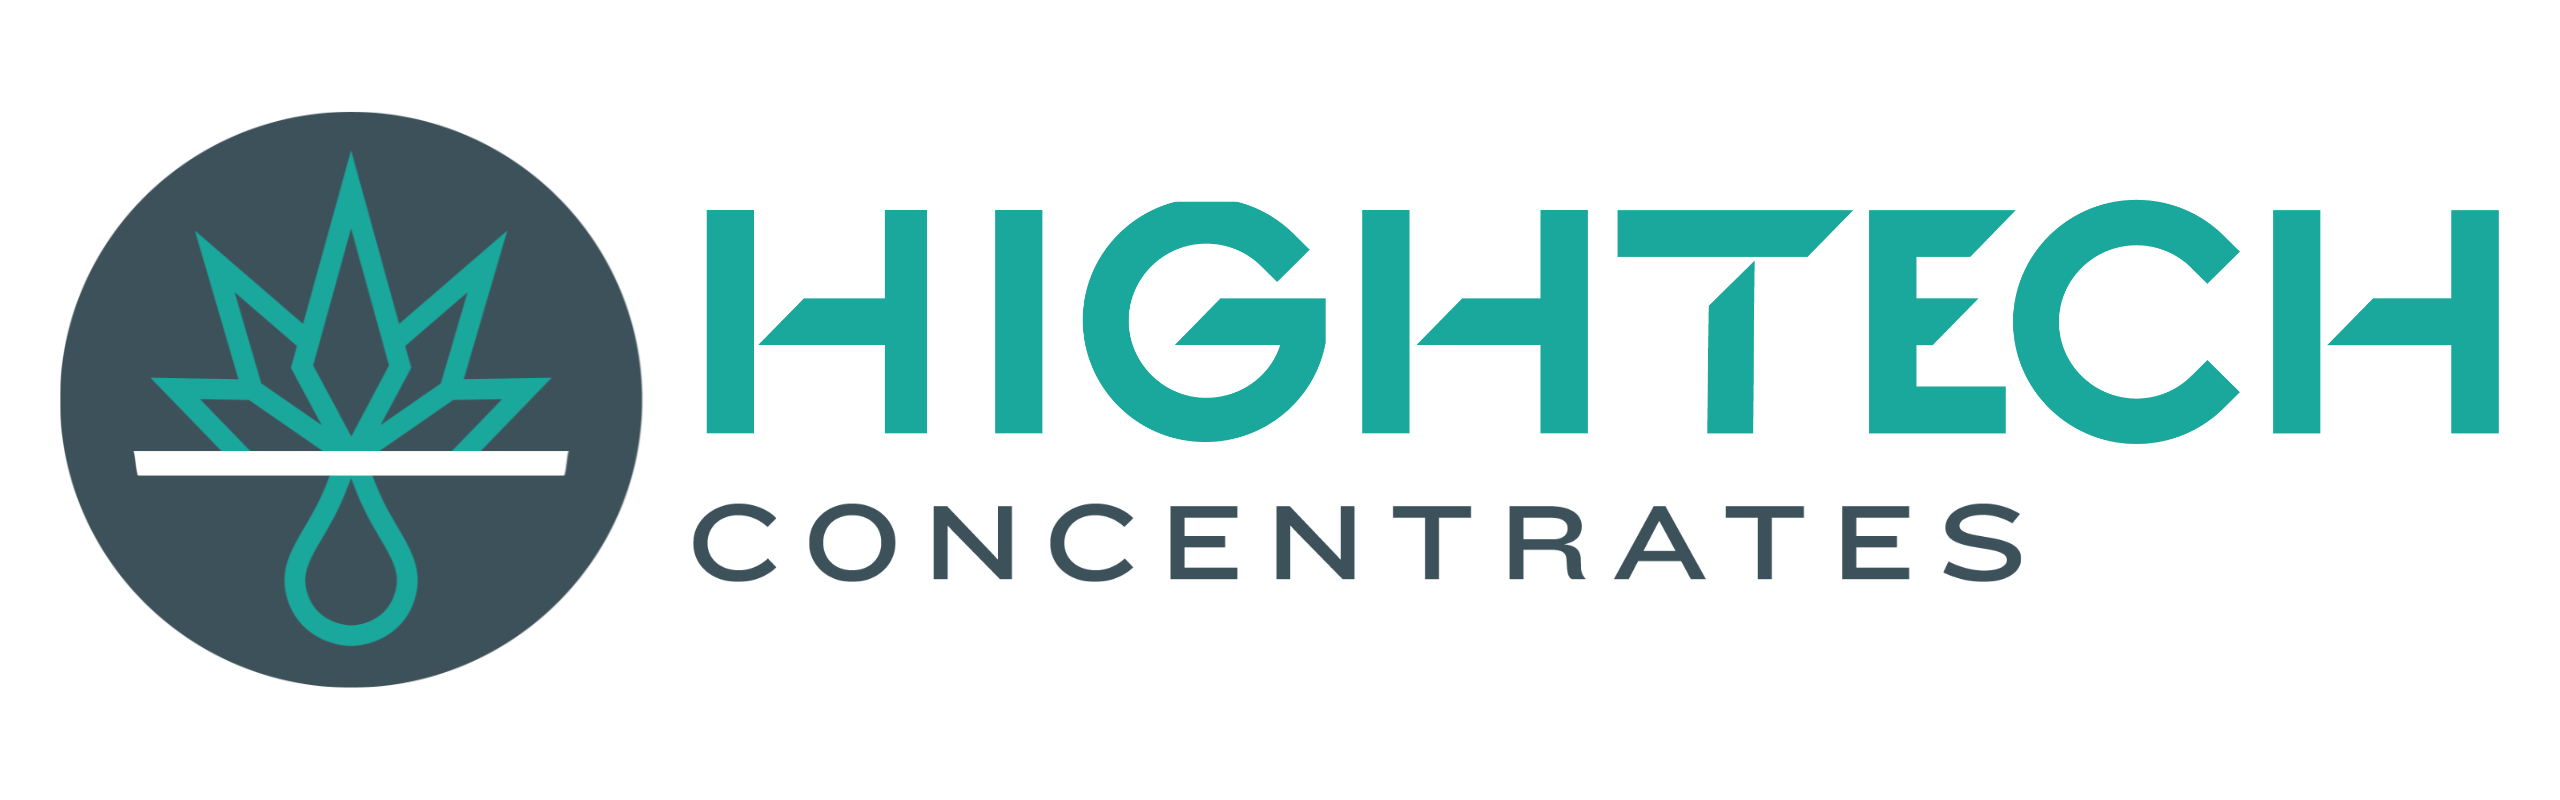 Hightech Concentrates Home Page